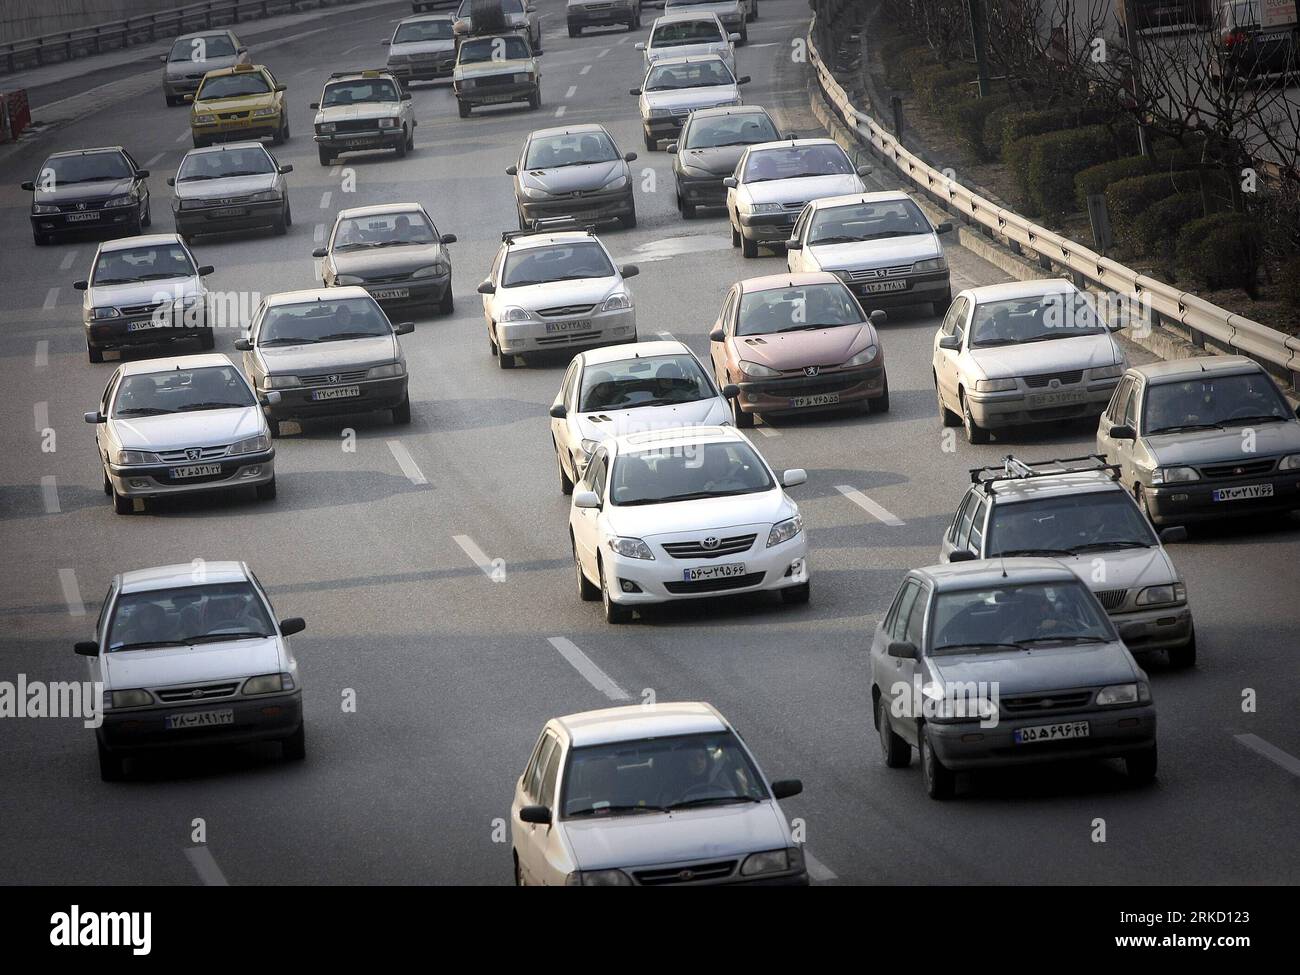 Bildnummer: 54836338  Datum: 20.01.2011  Copyright: imago/Xinhua (110120) -- TEHRAN, Jan. 20, 2011 (Xinhua) -- Cars travel along a highway in Tehran, capital of Iran, Jan. 20, 2011. The Iranian government announced recently that the ration of gasoline costing just 1,000 rials per liter (about 10 U.S. cents) for Iranians would be totally removed from Jan. 21, from when the drivers can still enjoy 60 liters of semi-subsidized gasoline at 4000 Rials per liter, and they must pay 7000 Rials (about 70 U.S. cents) per liter for extra gasoline. Iranian President Mahmoud Ahmadinejad announced the launc Stock Photo